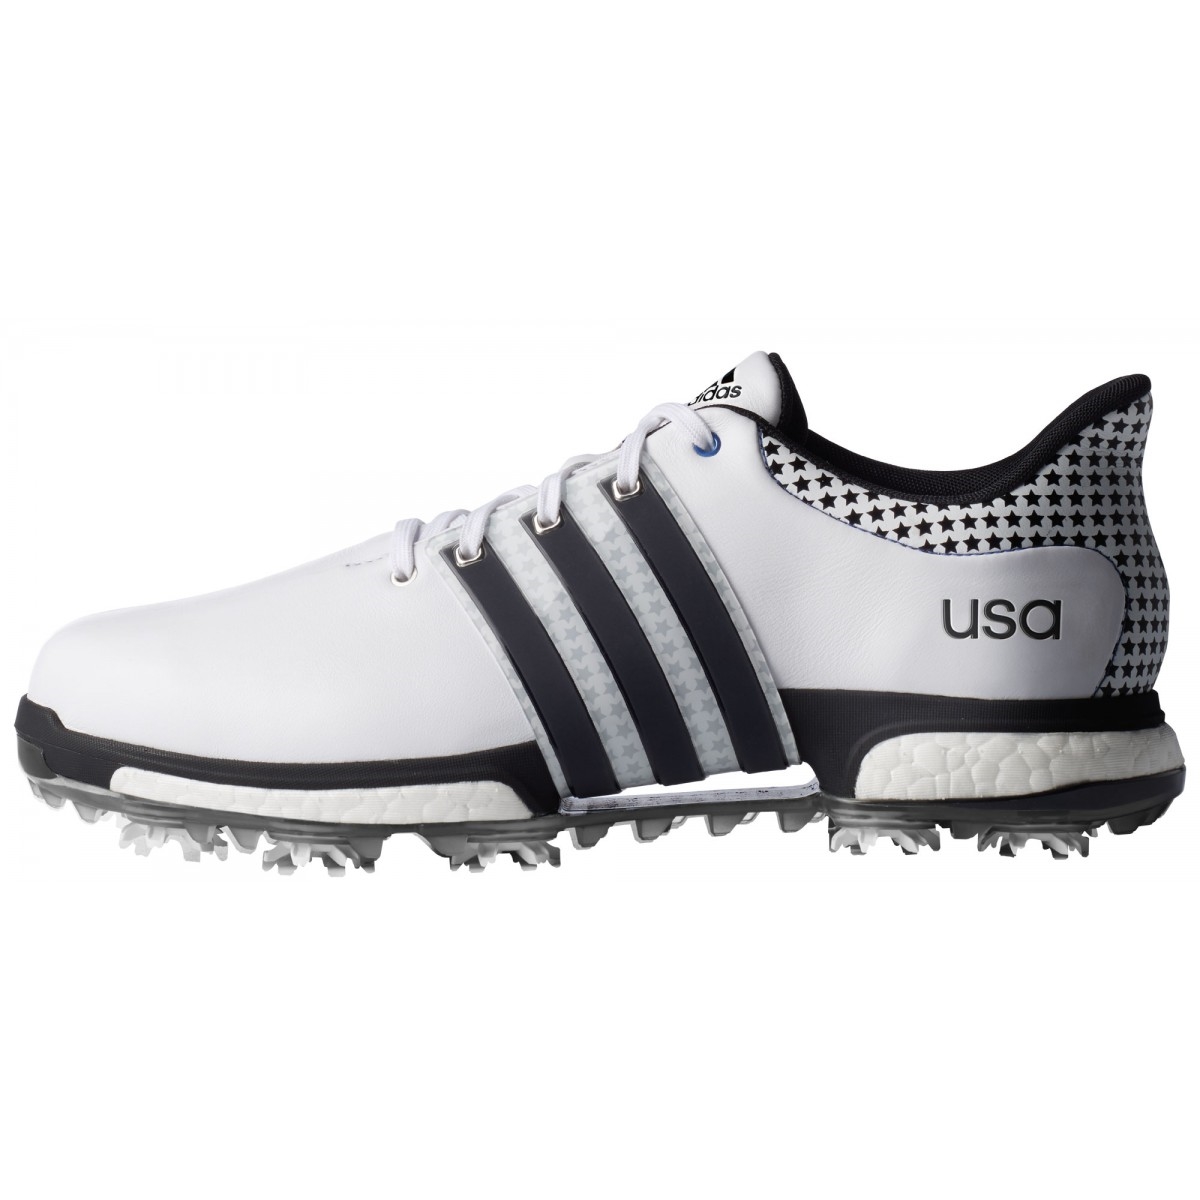 Adidas Tour 360 Boost Ryder Cup